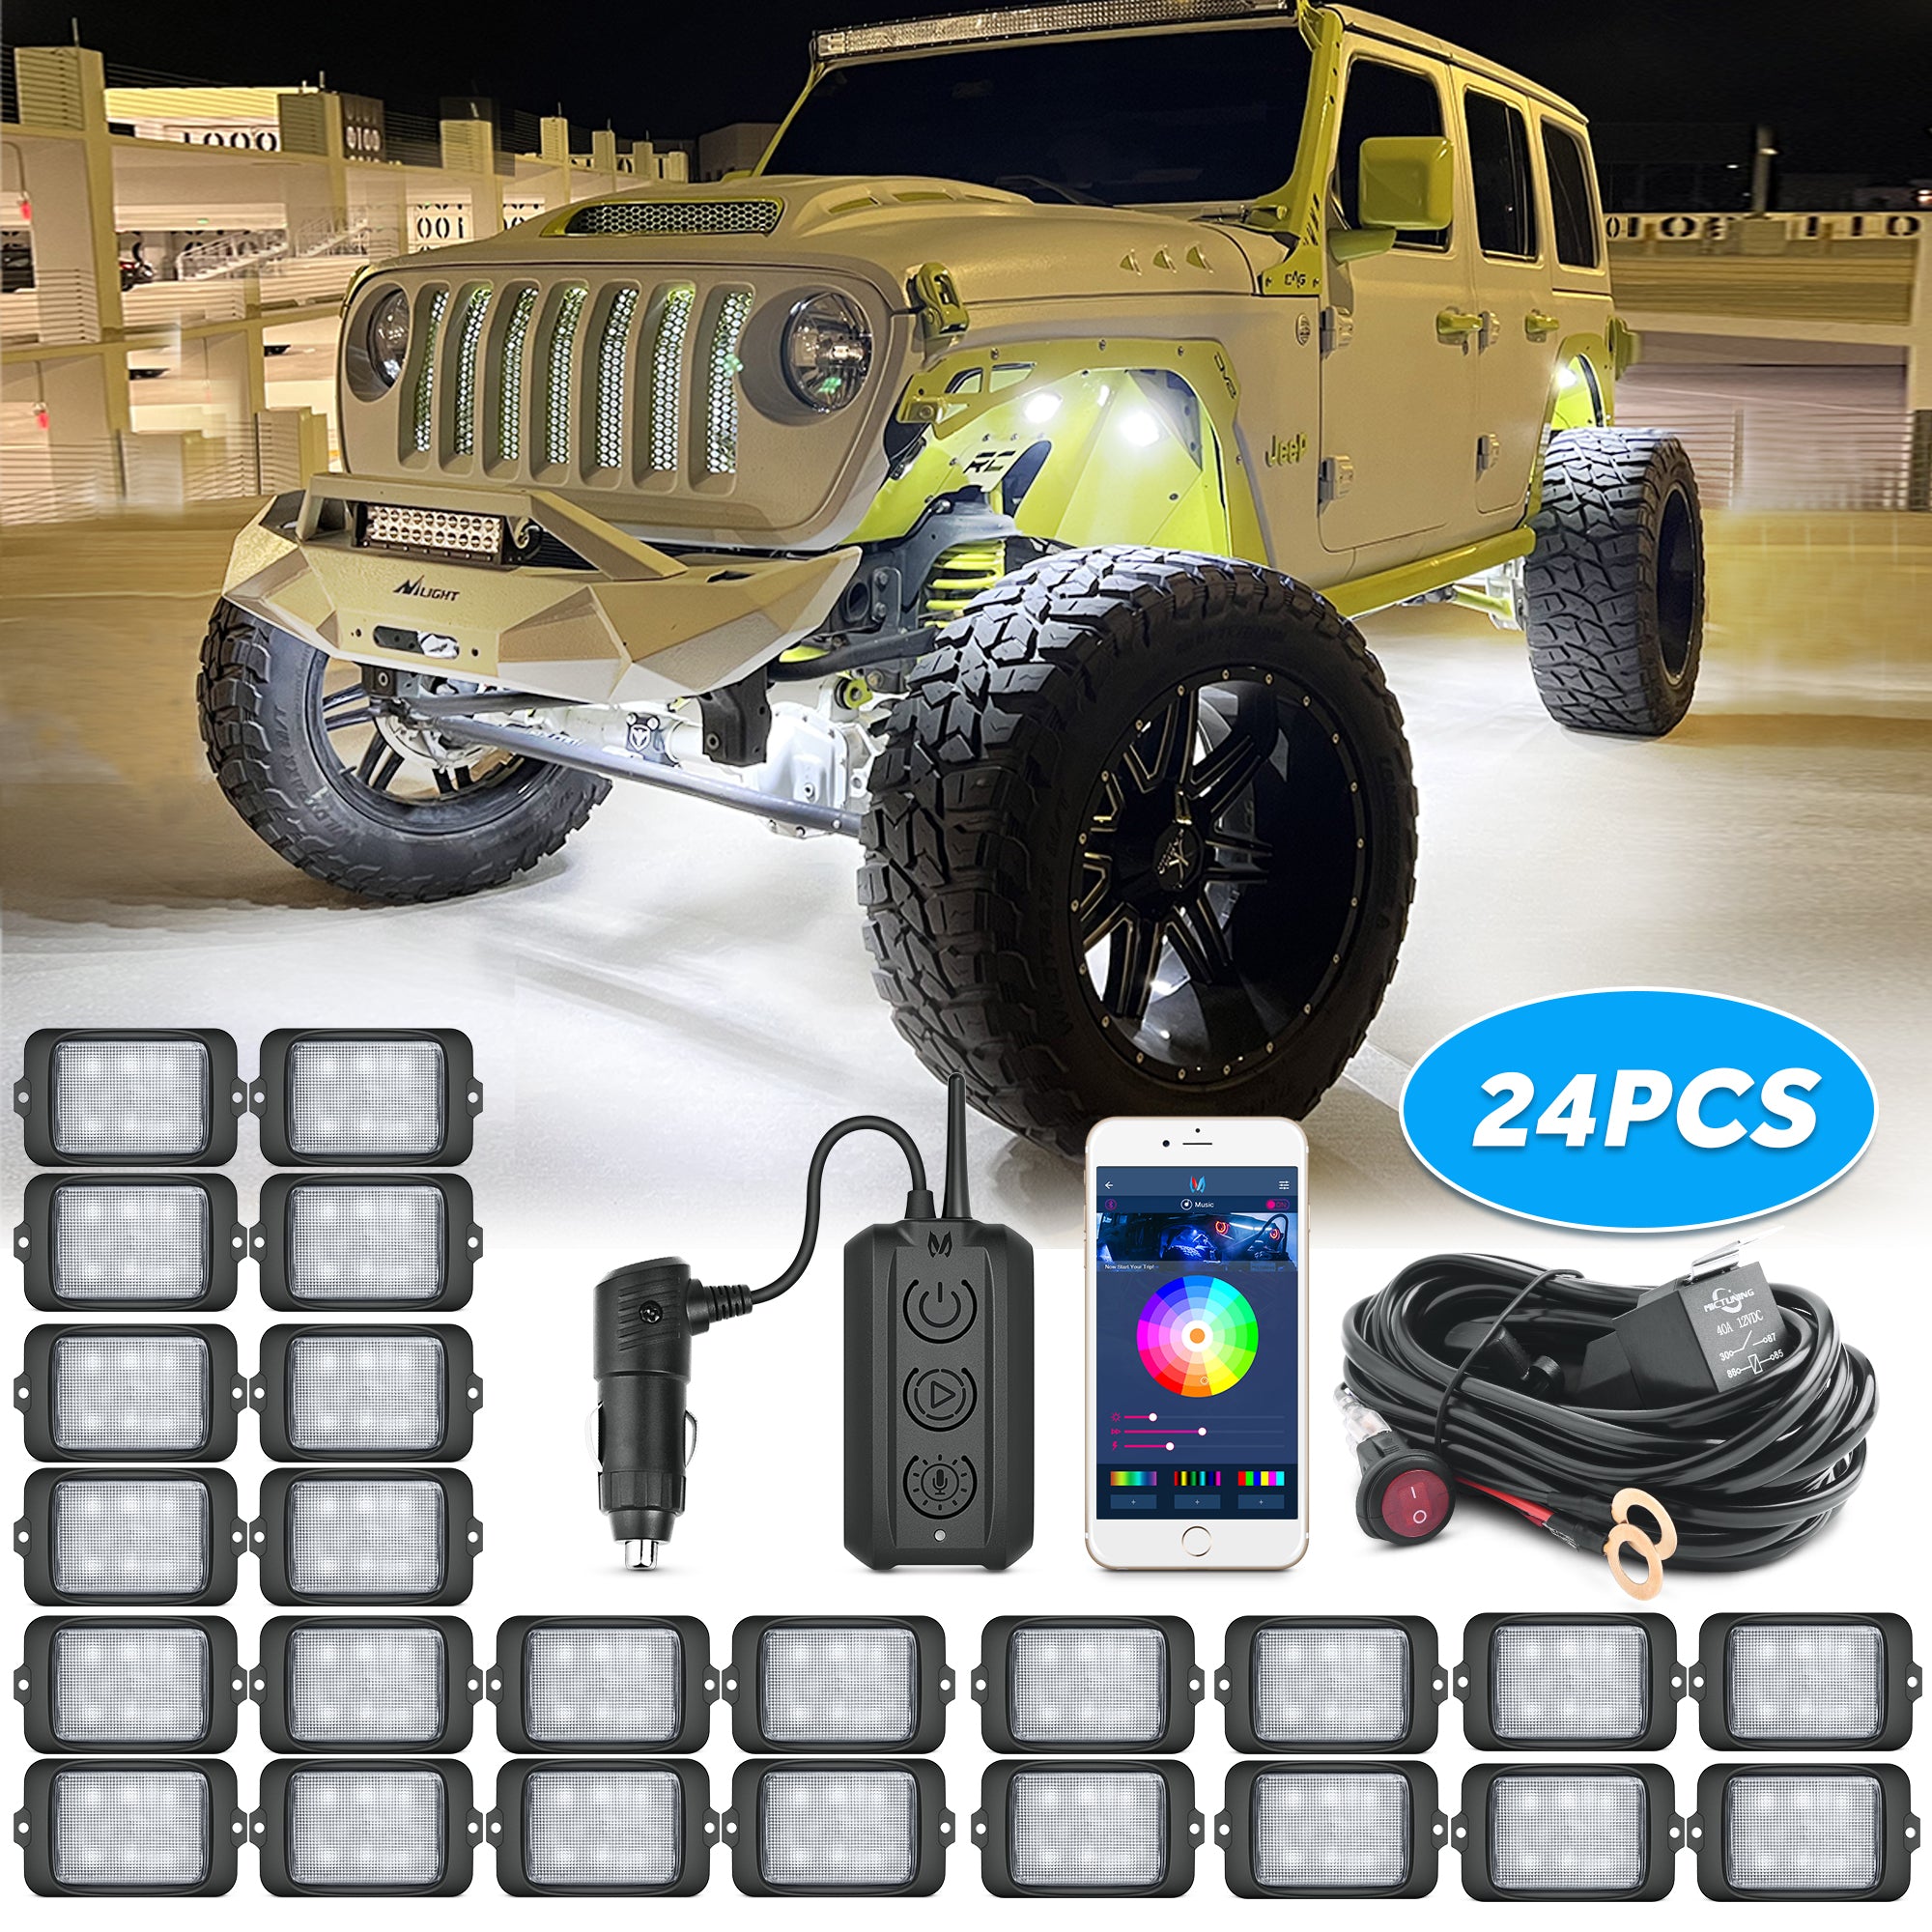 C3 Extensible RGBW LED Rock Lights - 24 Pods Wireless Control Multi-Color Neon Underglow Lights